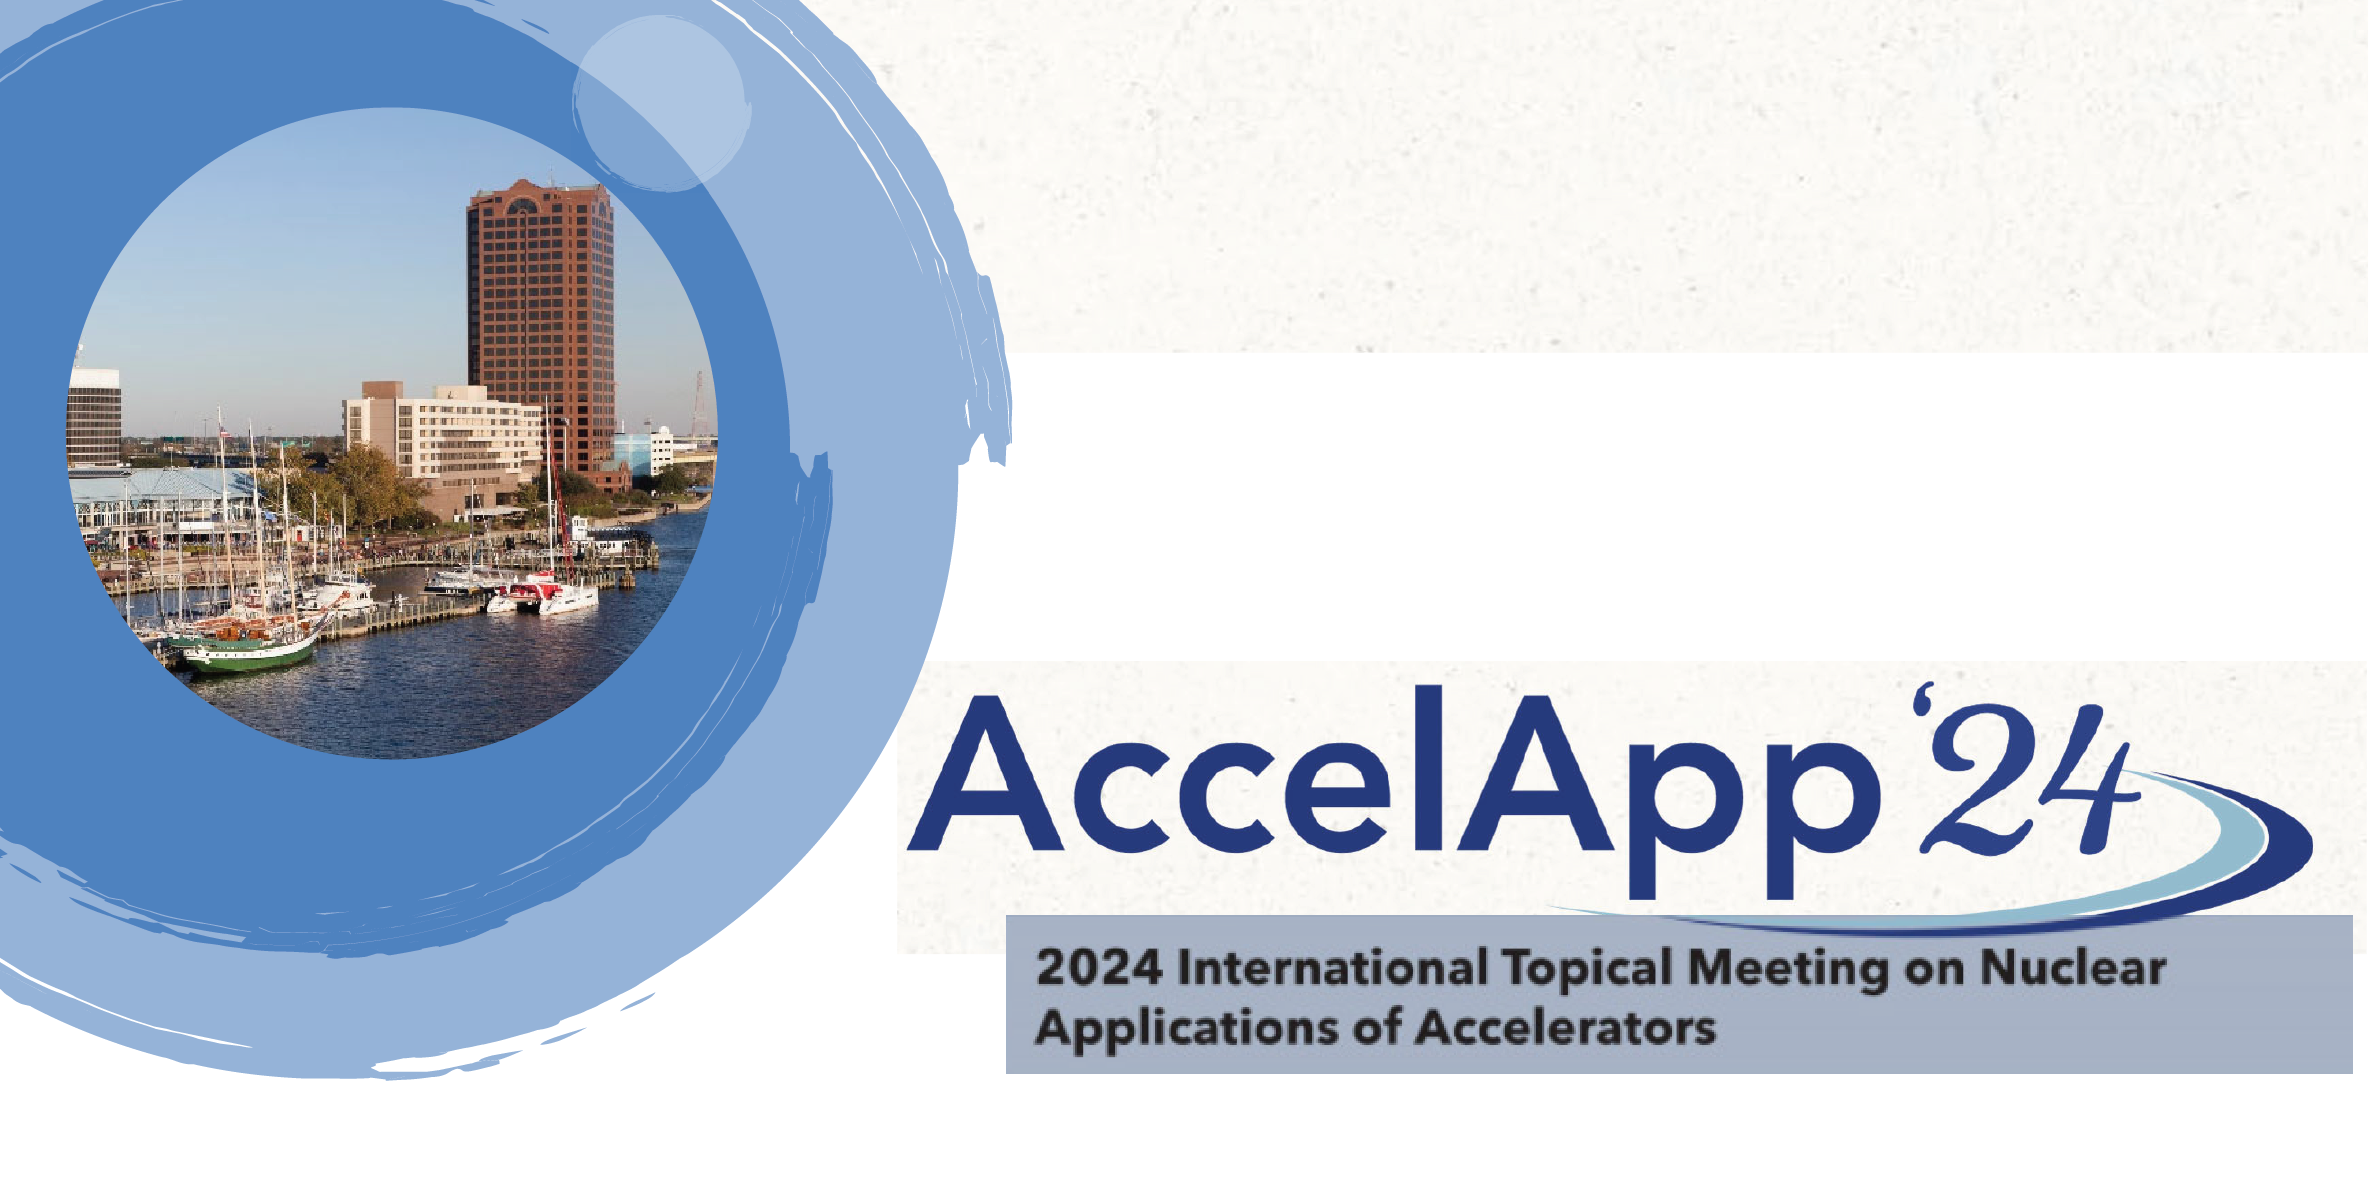 2024 International Topical Meeting on Nuclear Applications of Accelerators (AccelApp ’24)